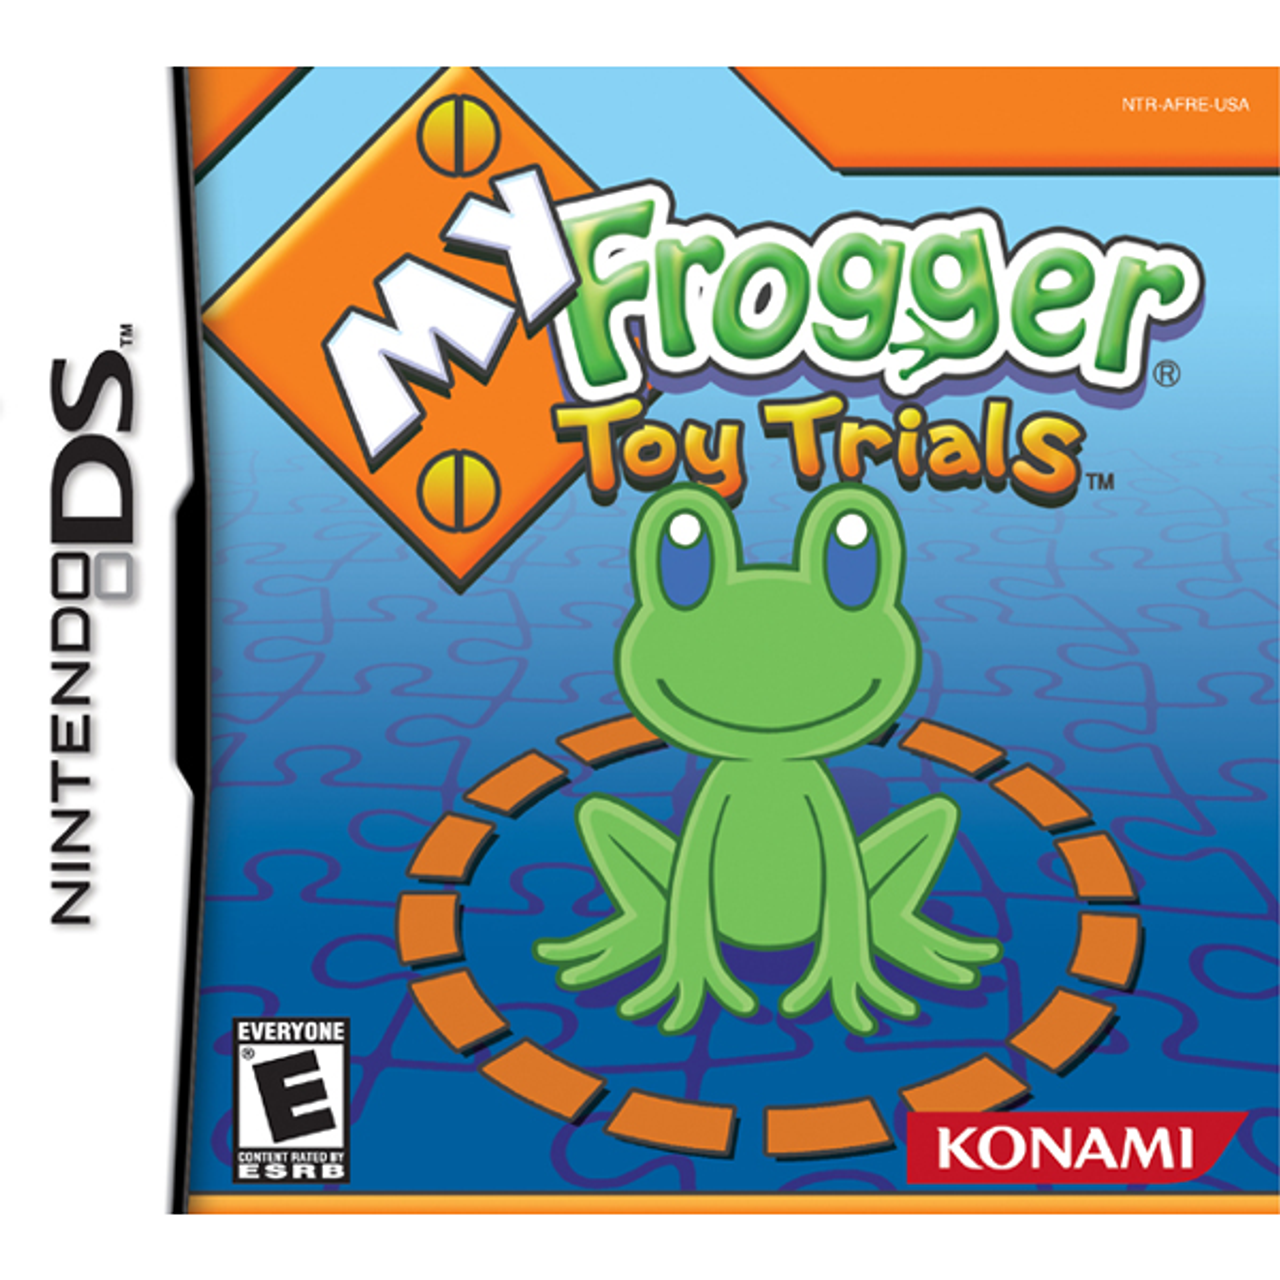 My Frogger Toy Trials Nintendo DS Game For Sale | DKOldies